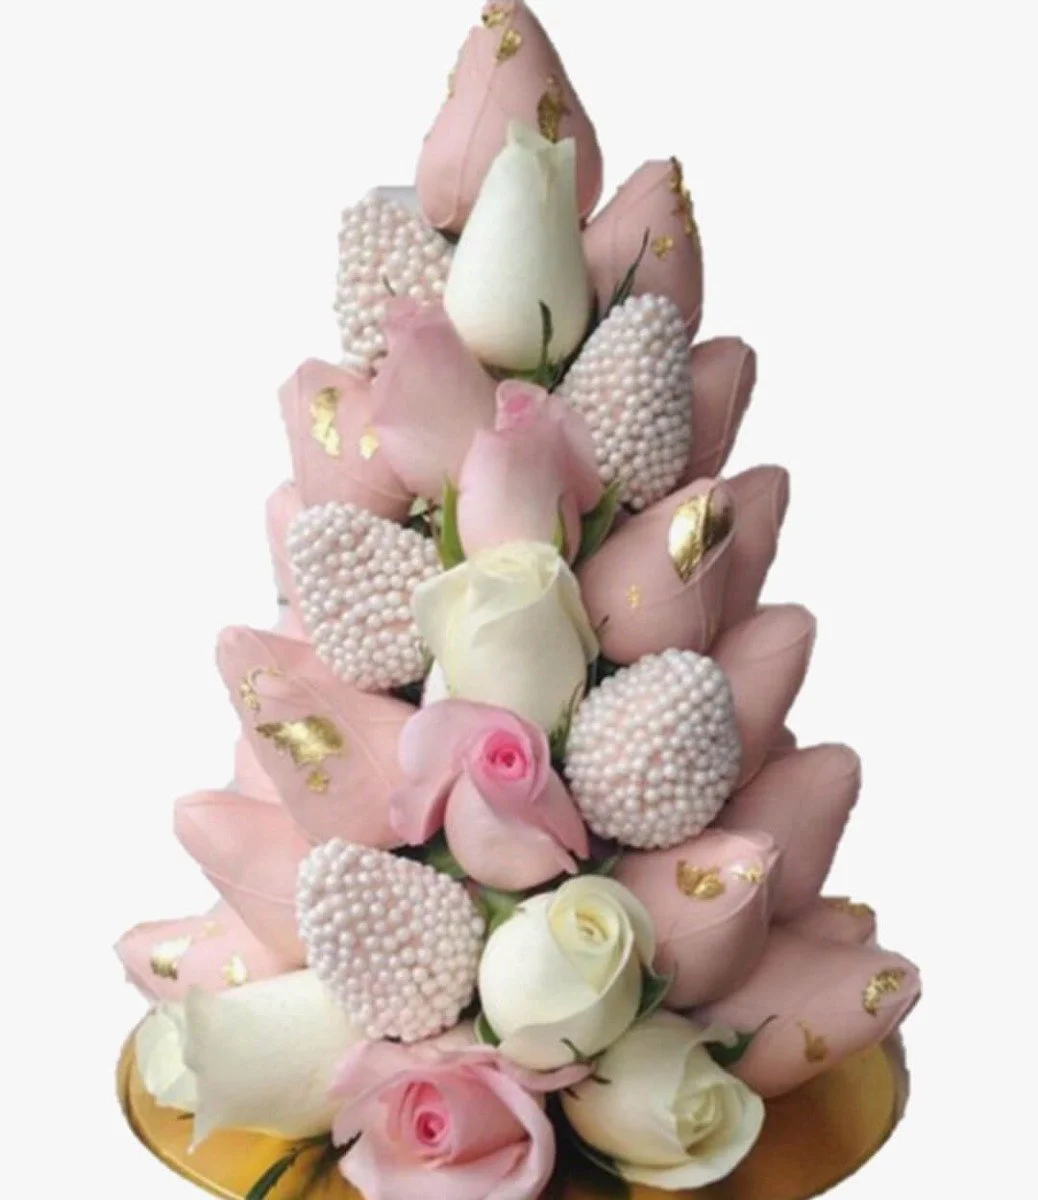 Pink Strawberry Chocolate Tower by NJD